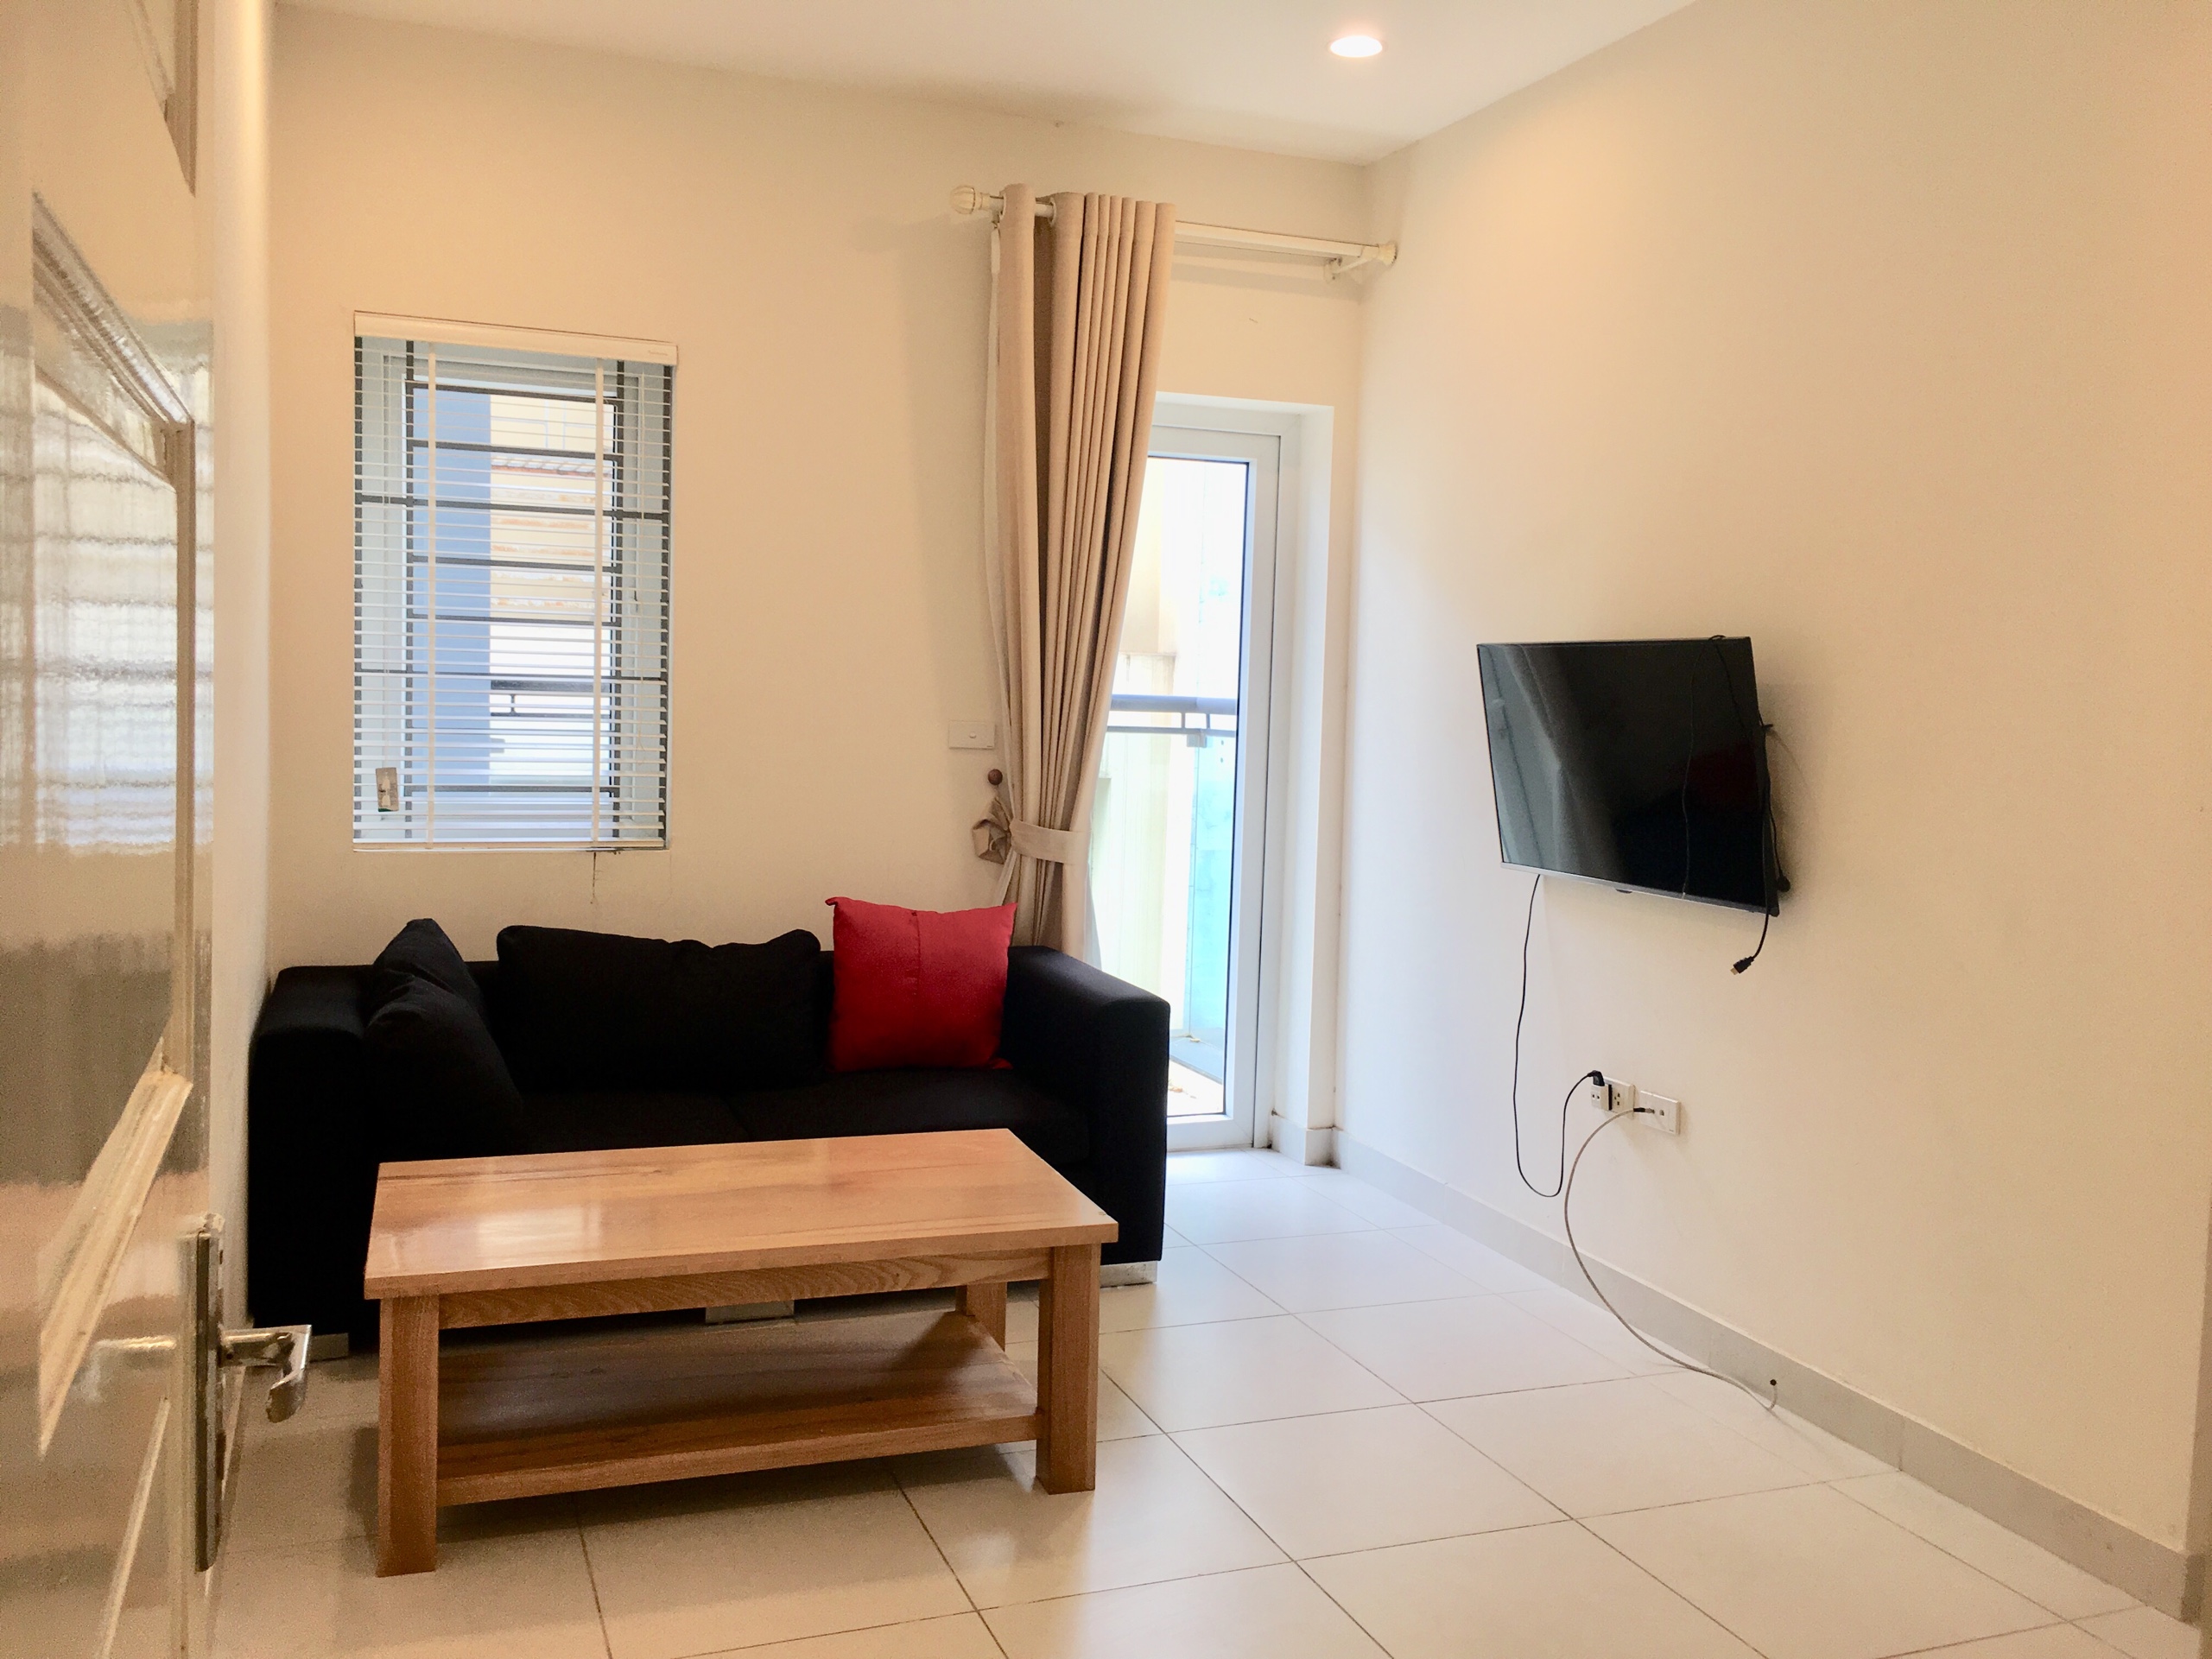 Budget Price & Spacious One Bedroom Apartment Rental near Water Park, Tay Ho